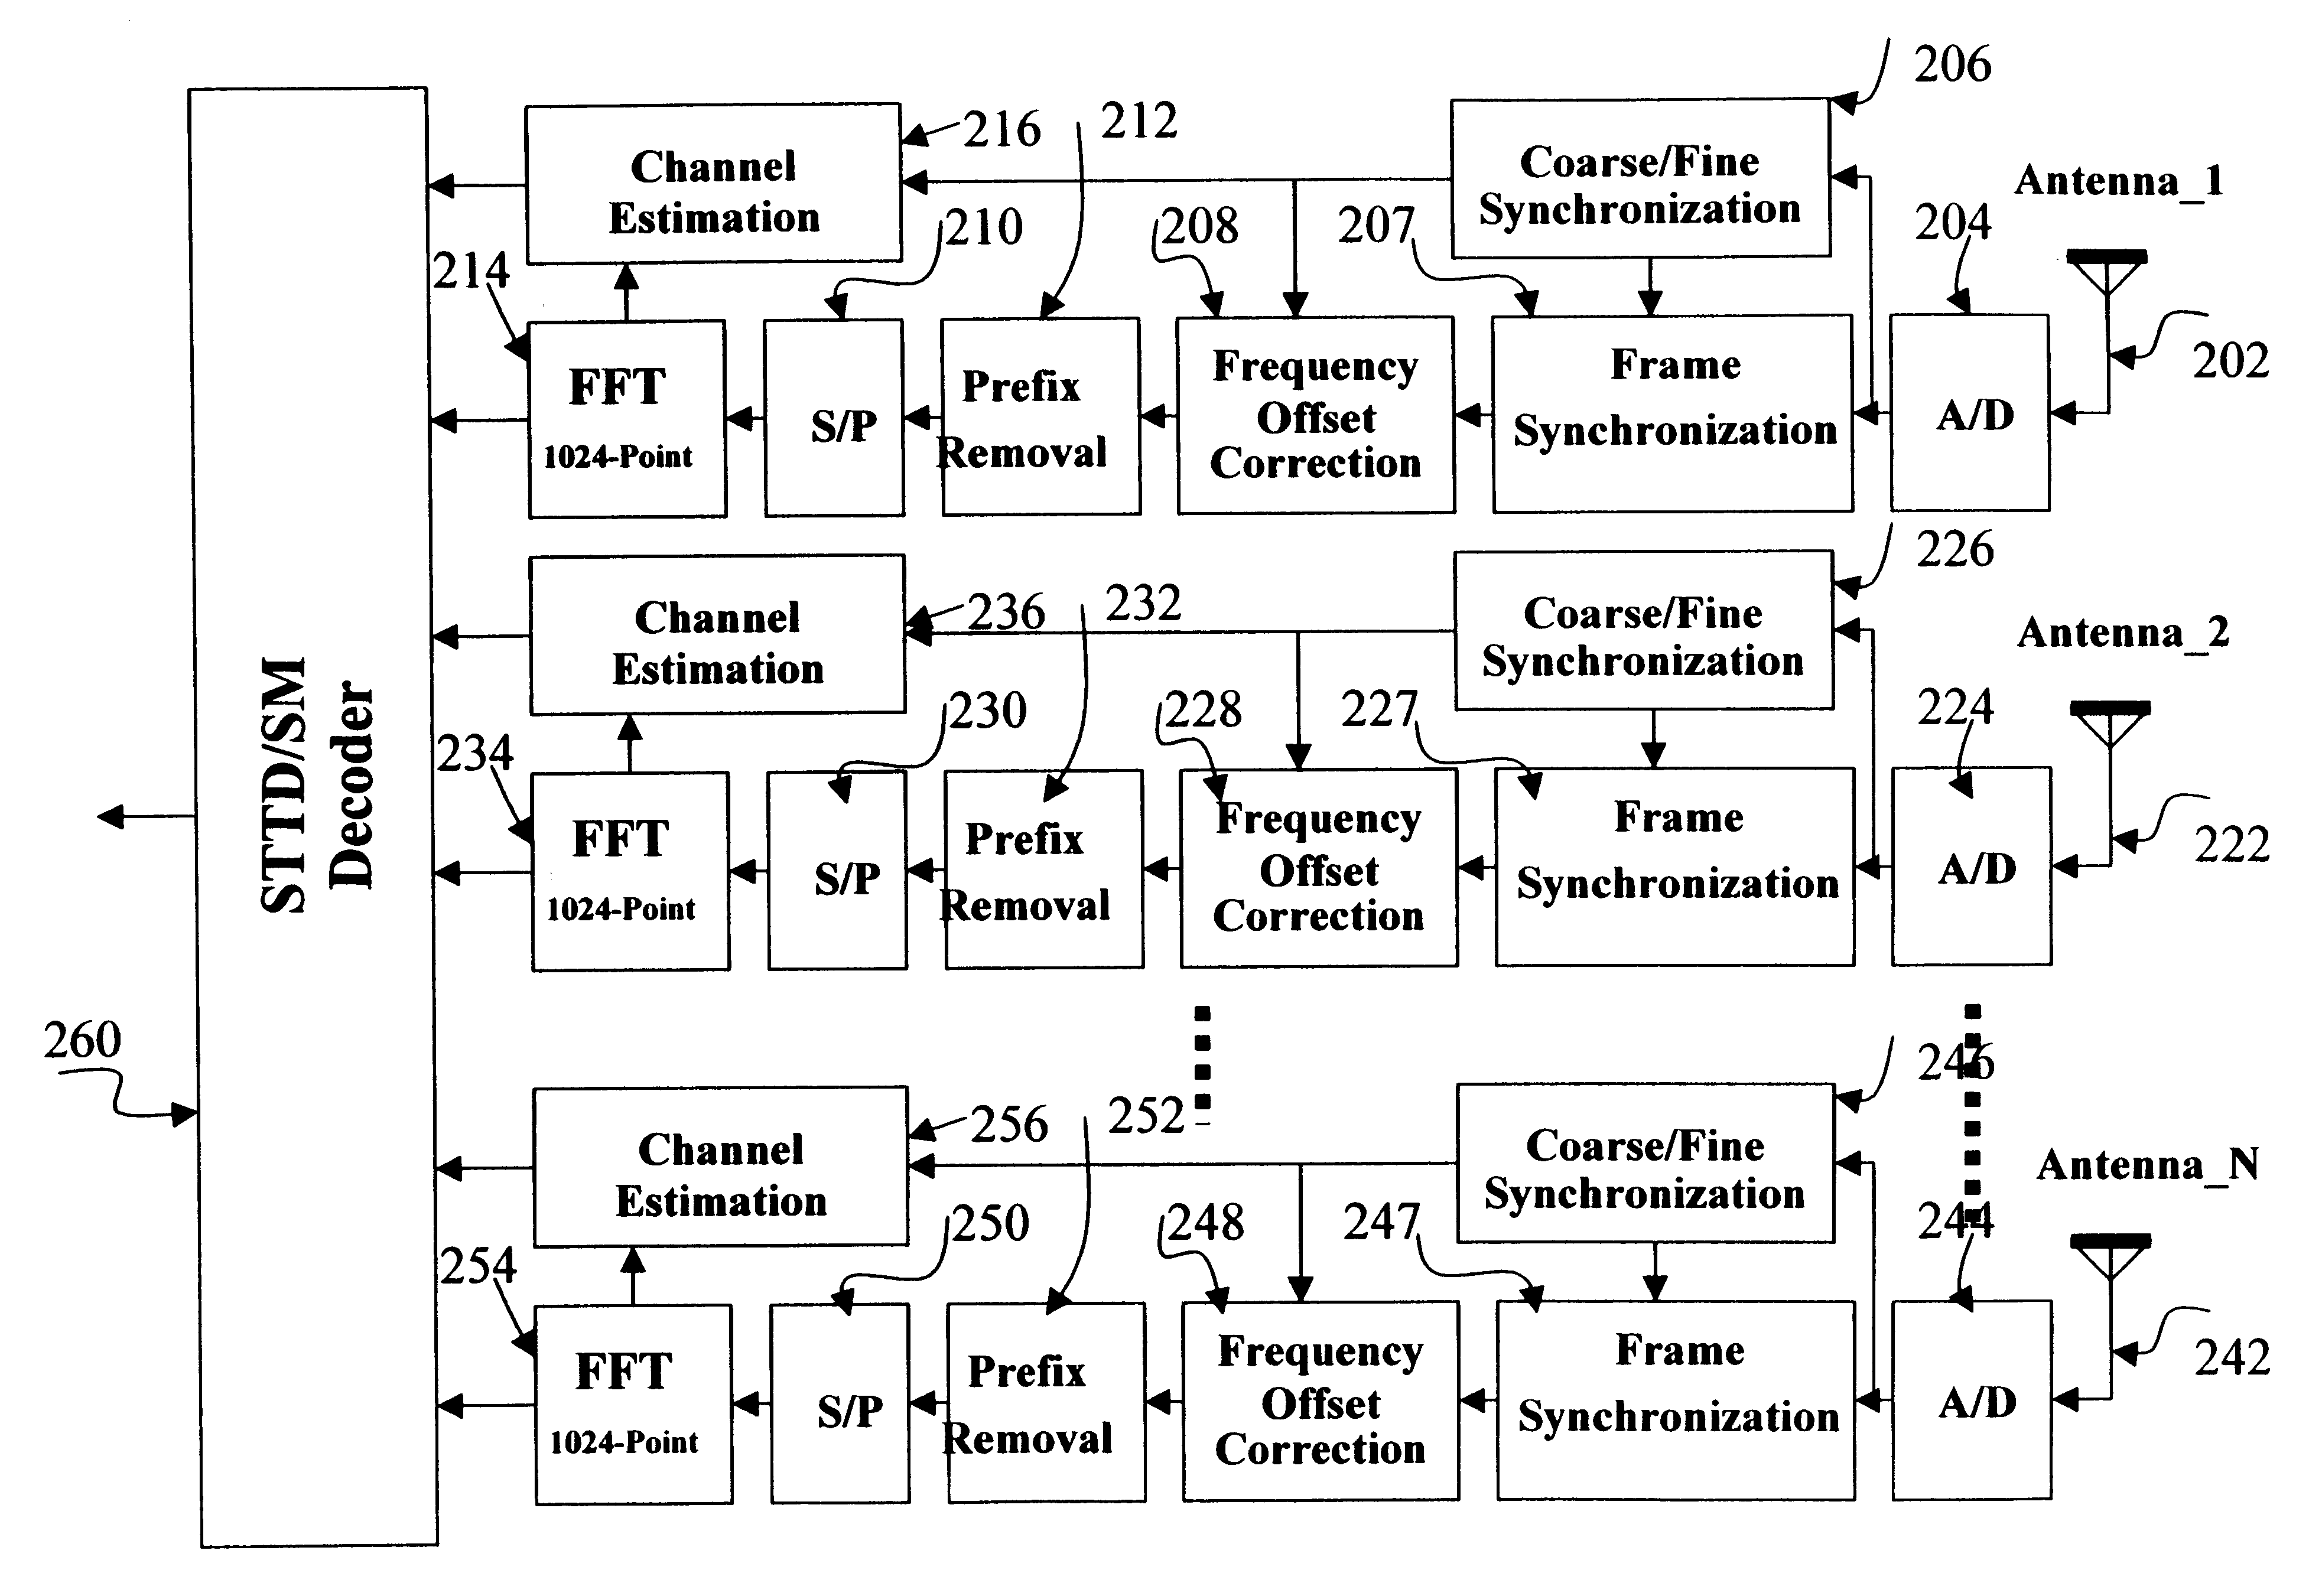 Channels estimation for multiple input-multiple output, orthogonal frequency division multiplexing (OFDM) system